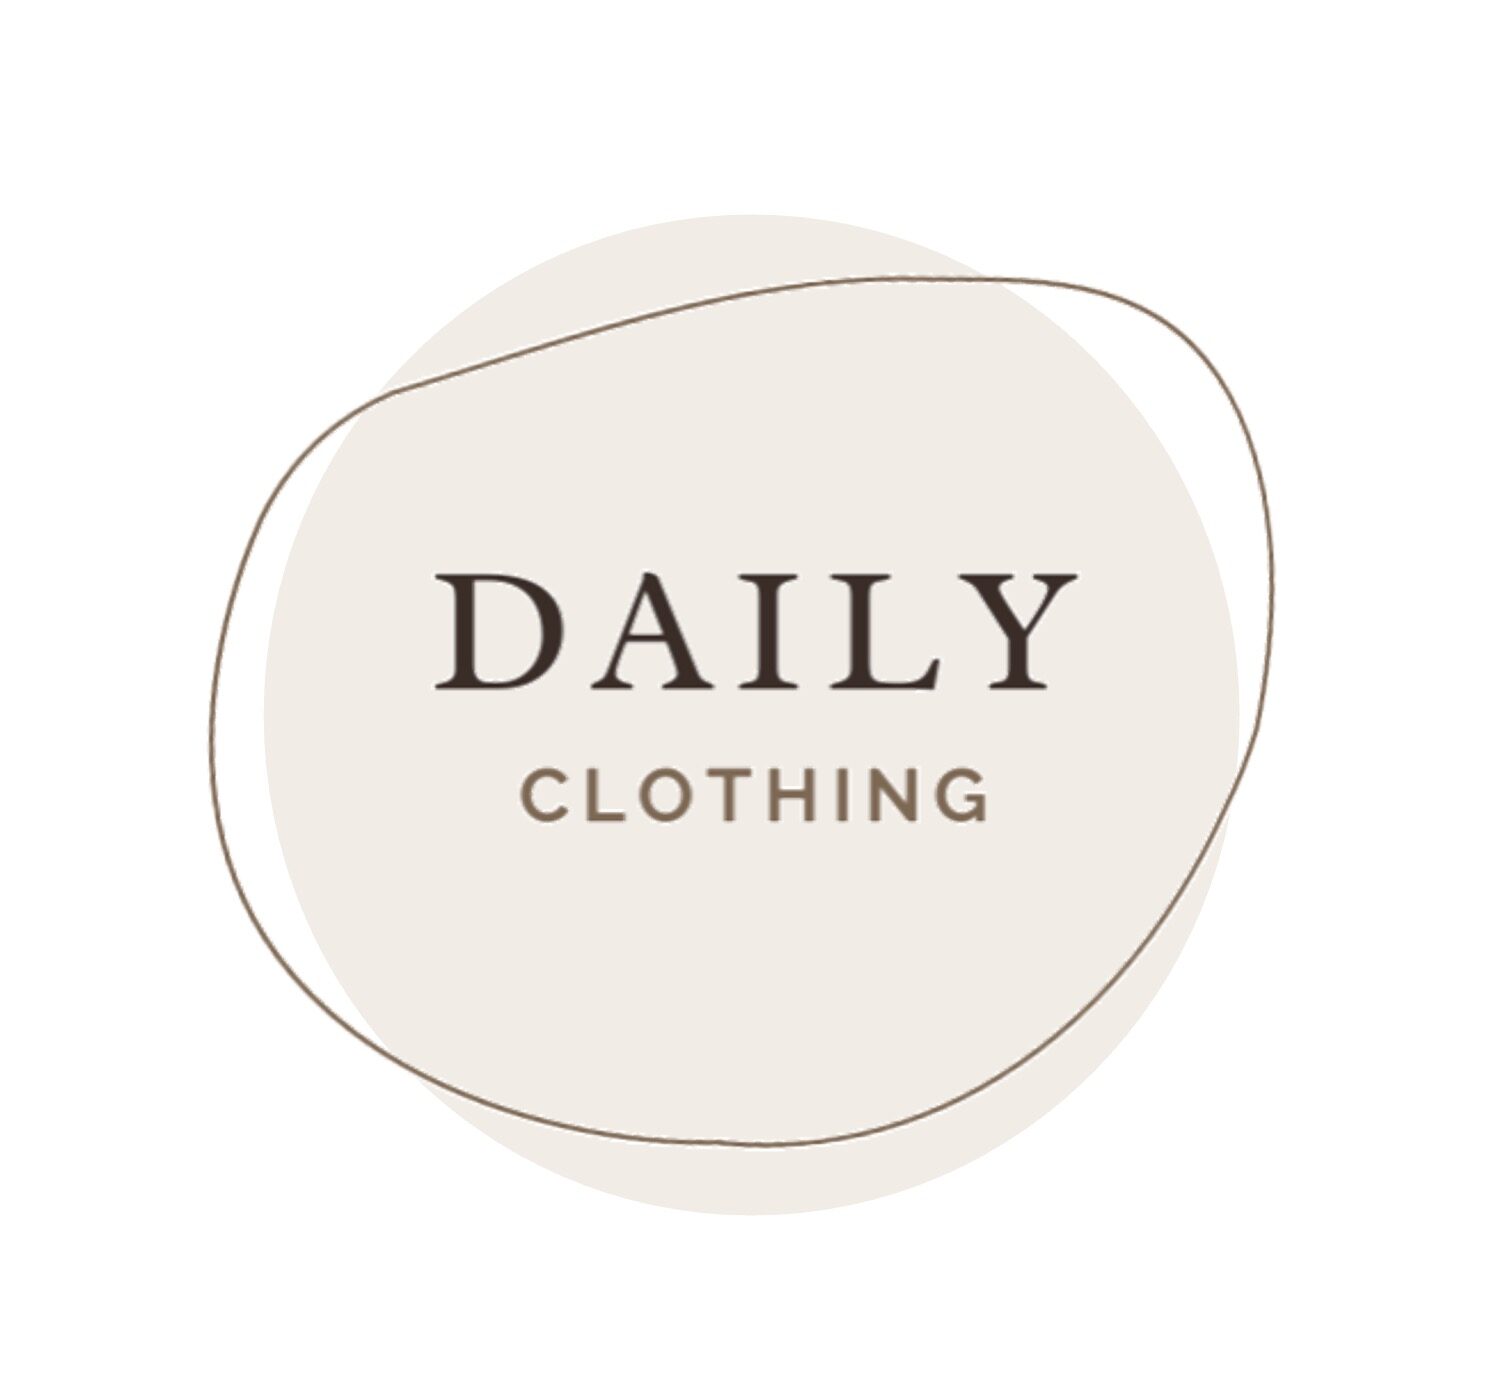 DAILY clothing